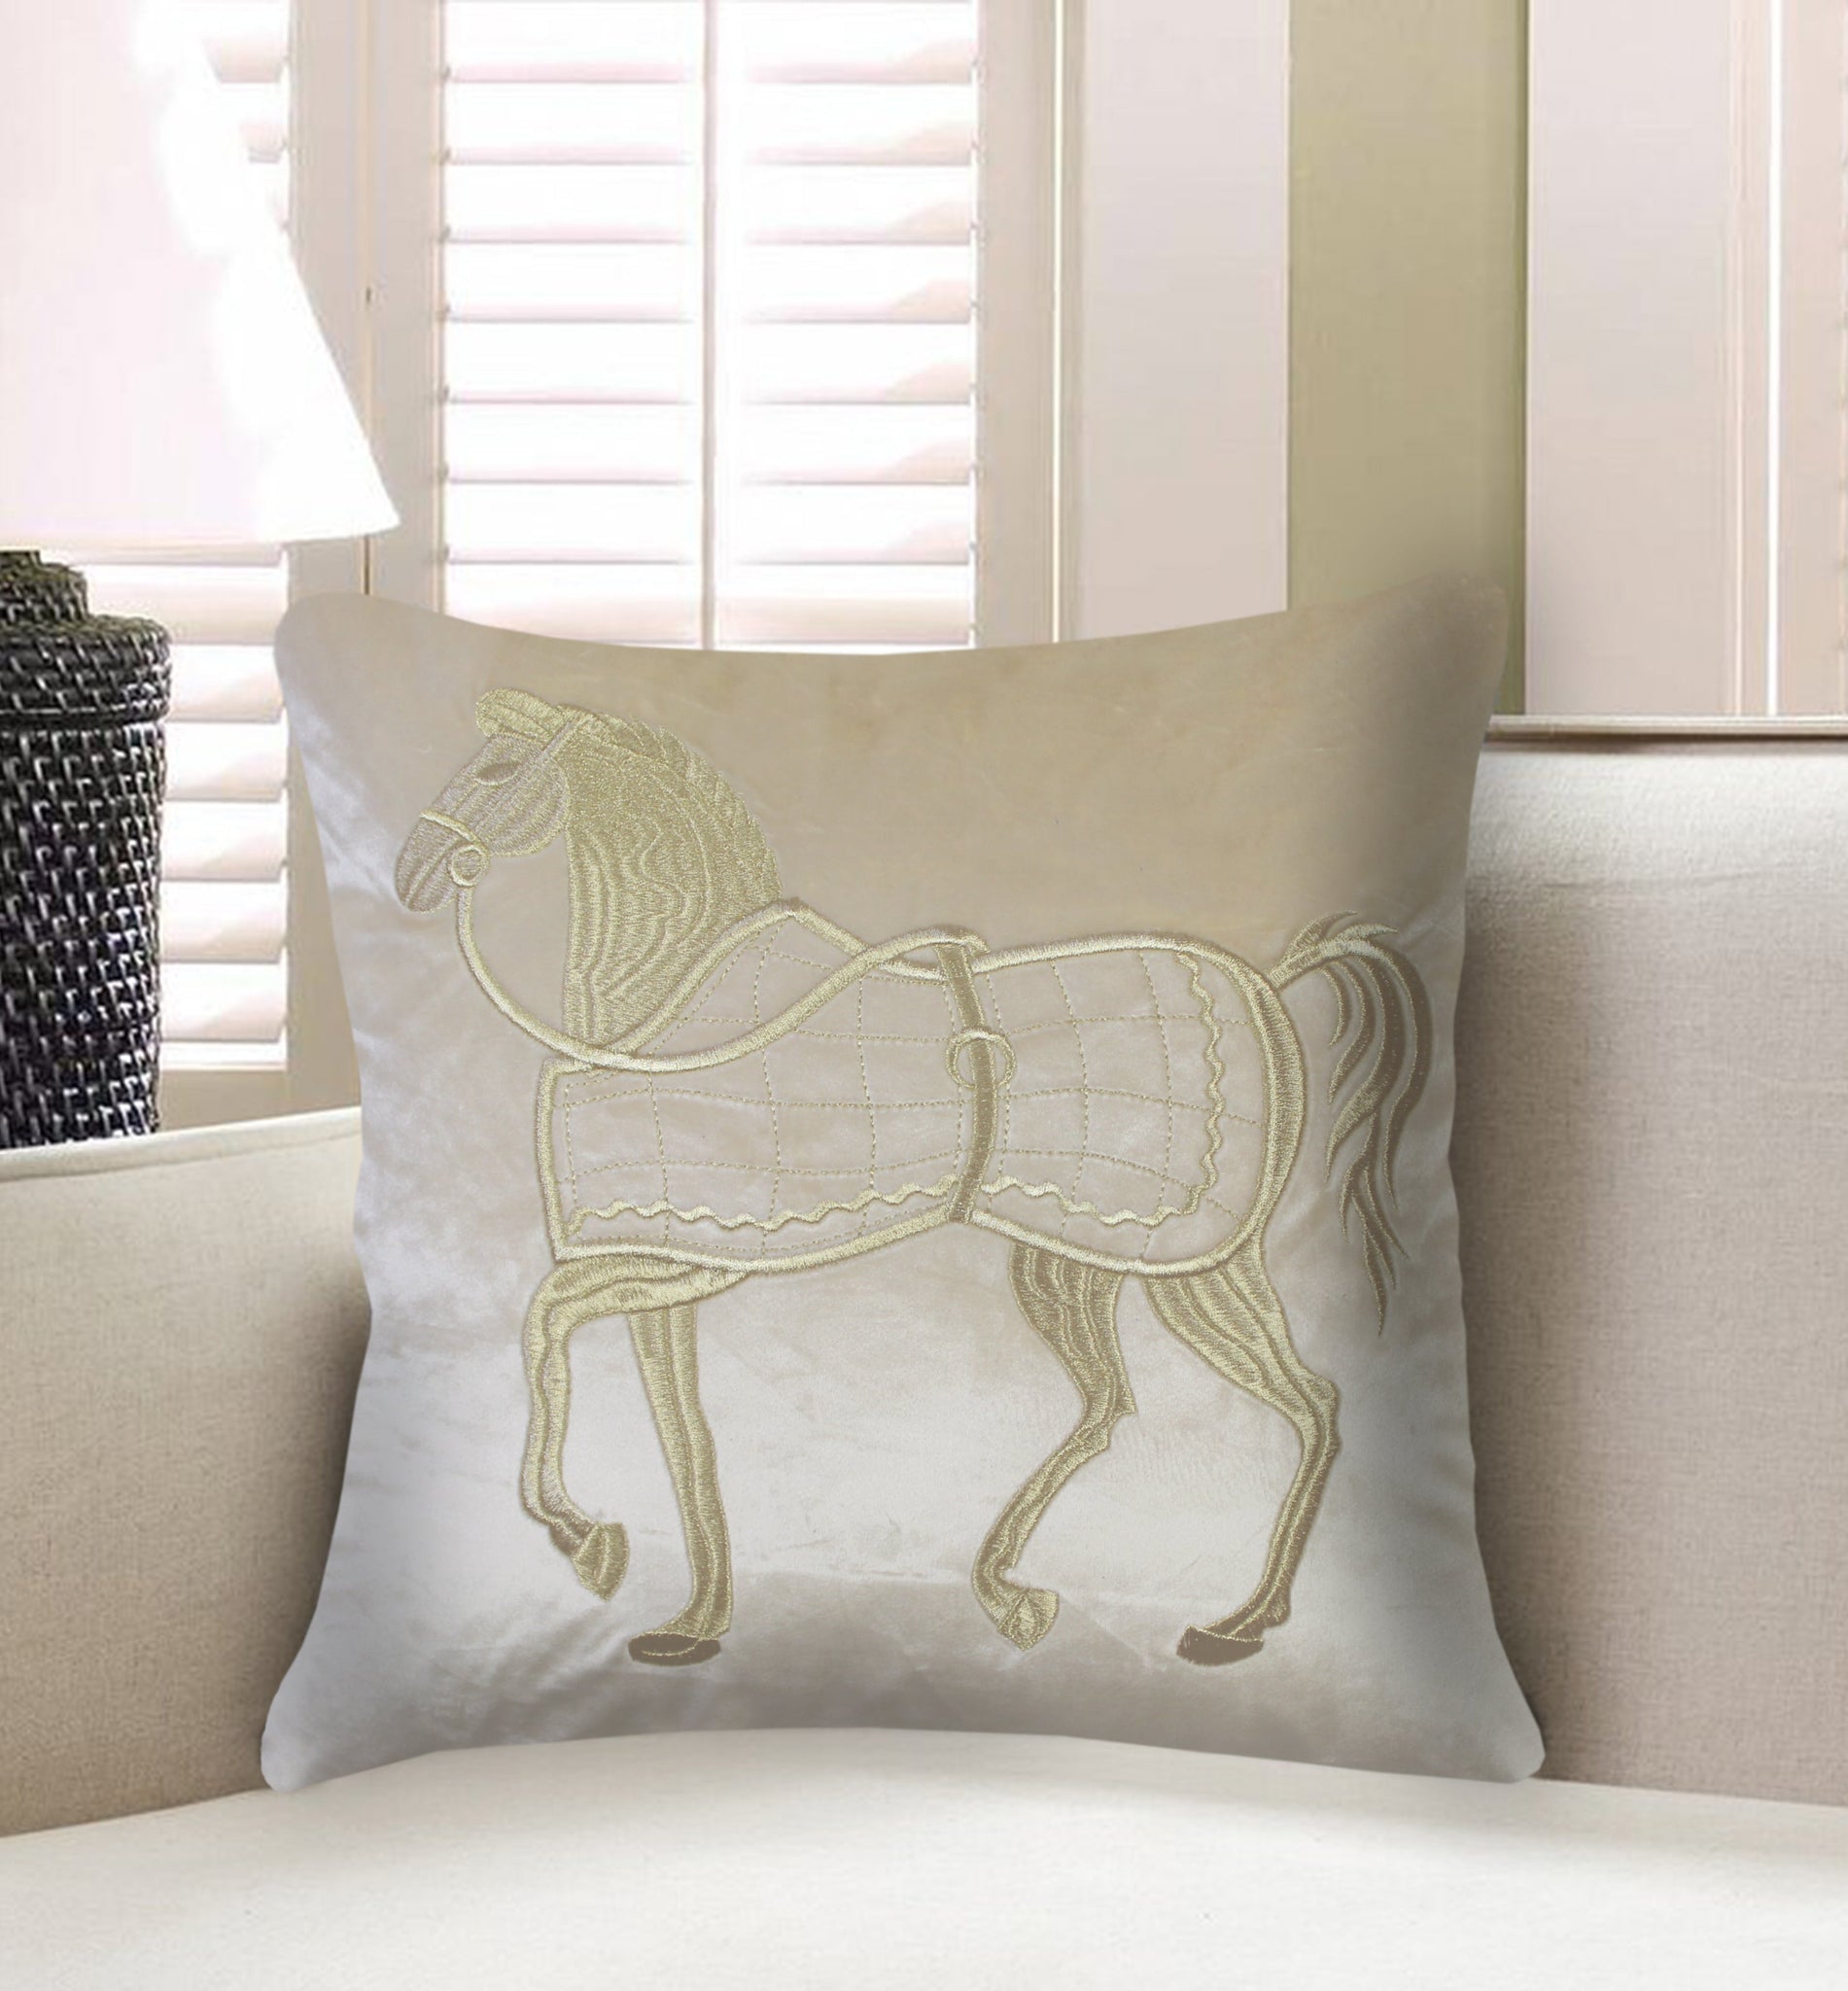 Beige Cushion Cover Velvet Decorative Pillow Cover Classic Horse Embroidery Home Decor Style Throw Pillow for Sofa Chair Bedroom Living Room 45x45 cm (18x18 Inches).